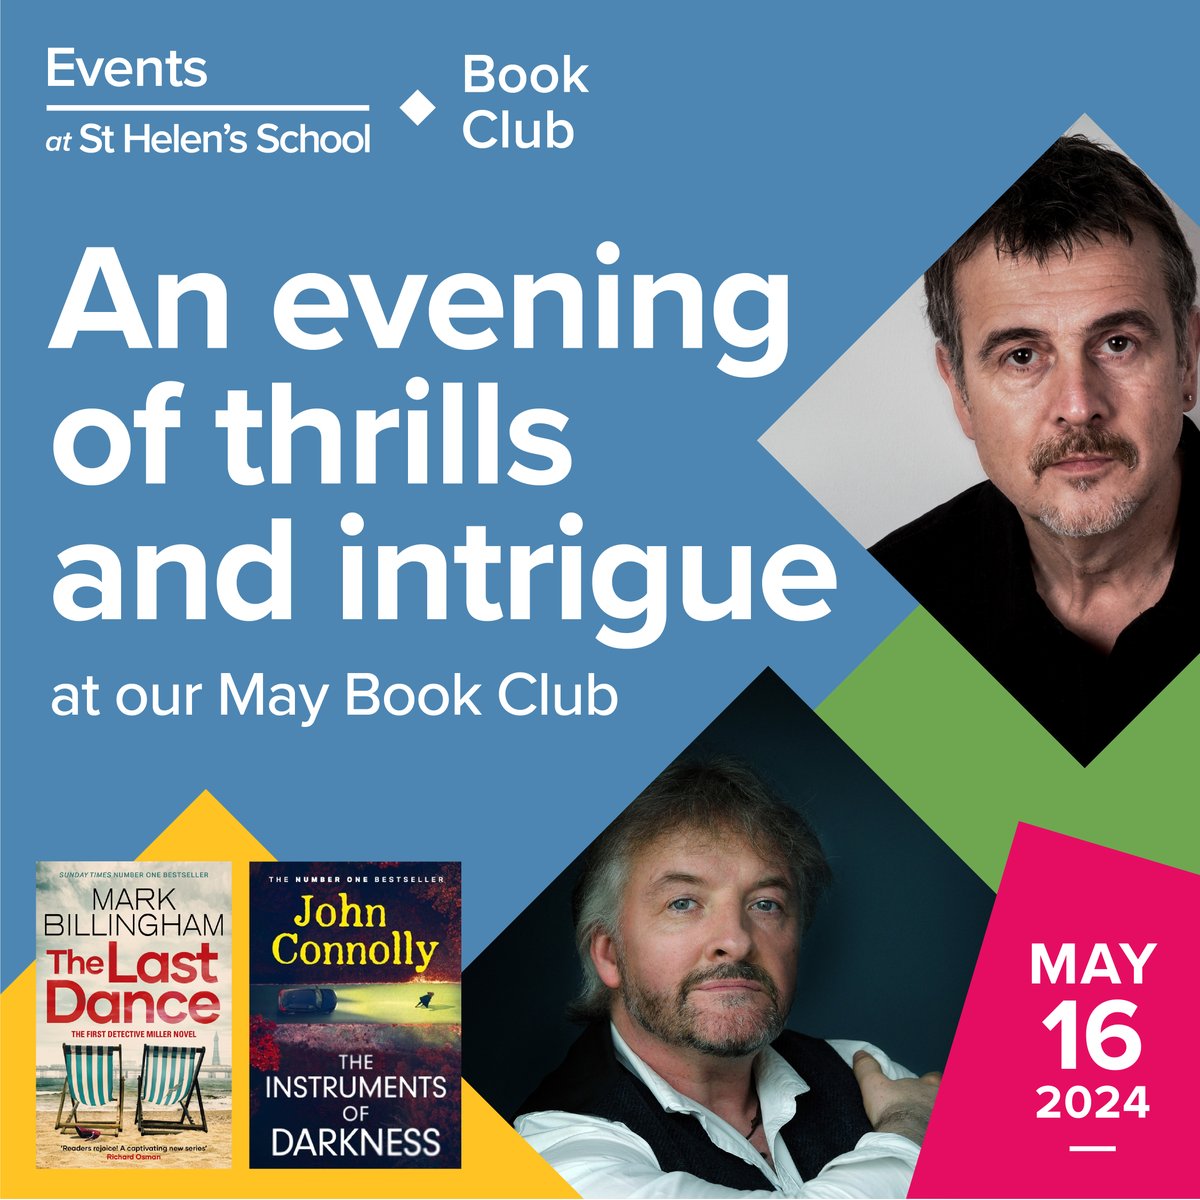 You are invited to an evening of thrills and intrigue as we welcome @jconnollybooks and @MarkBillingham to our Book Club! ow.ly/XL9G50Rlgue #BookClub